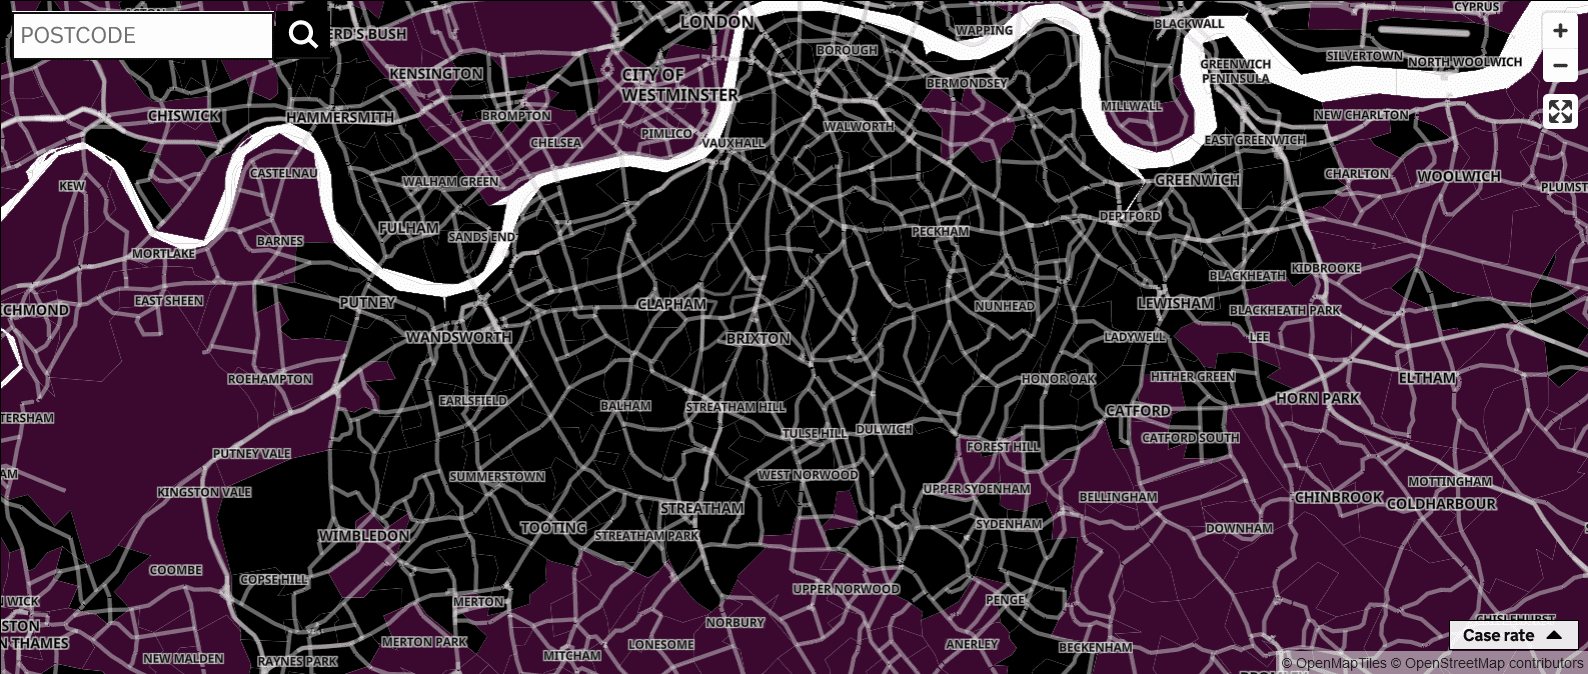 Central London is ablaze with Covid, with most areas having more than 1,699 cases per 100,000 people